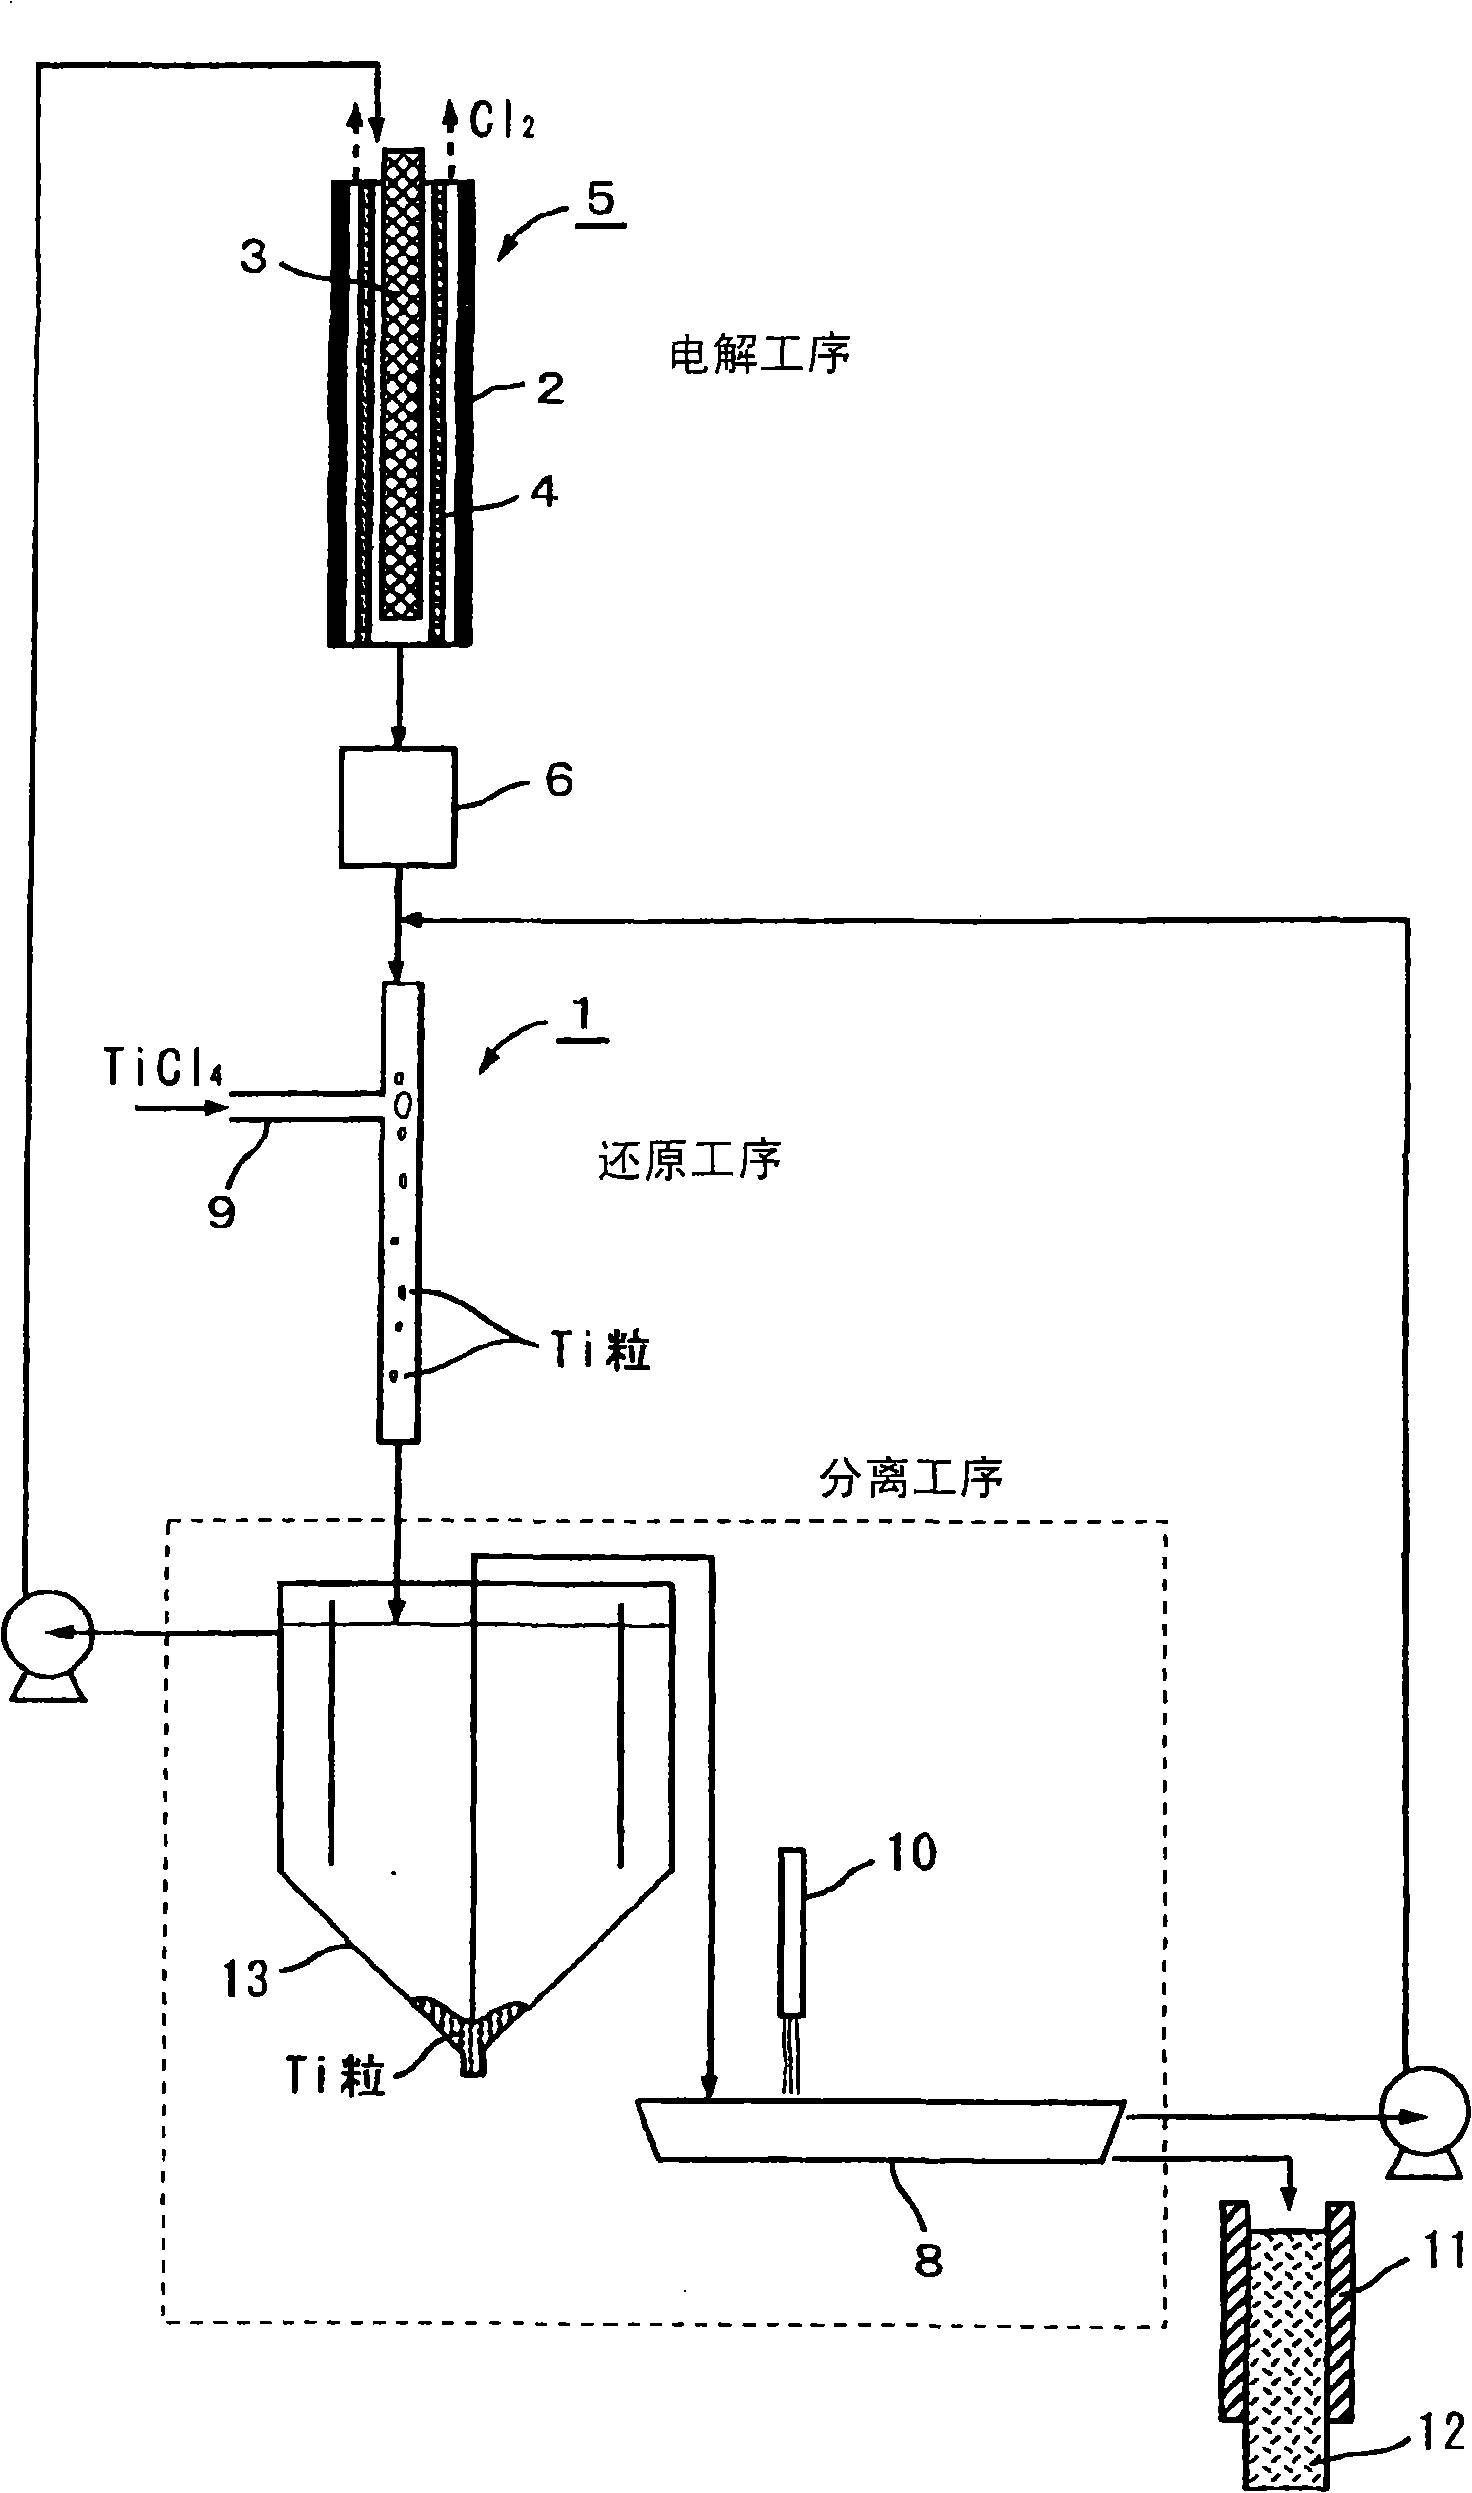 Process for producing Ti and apparatus therefor